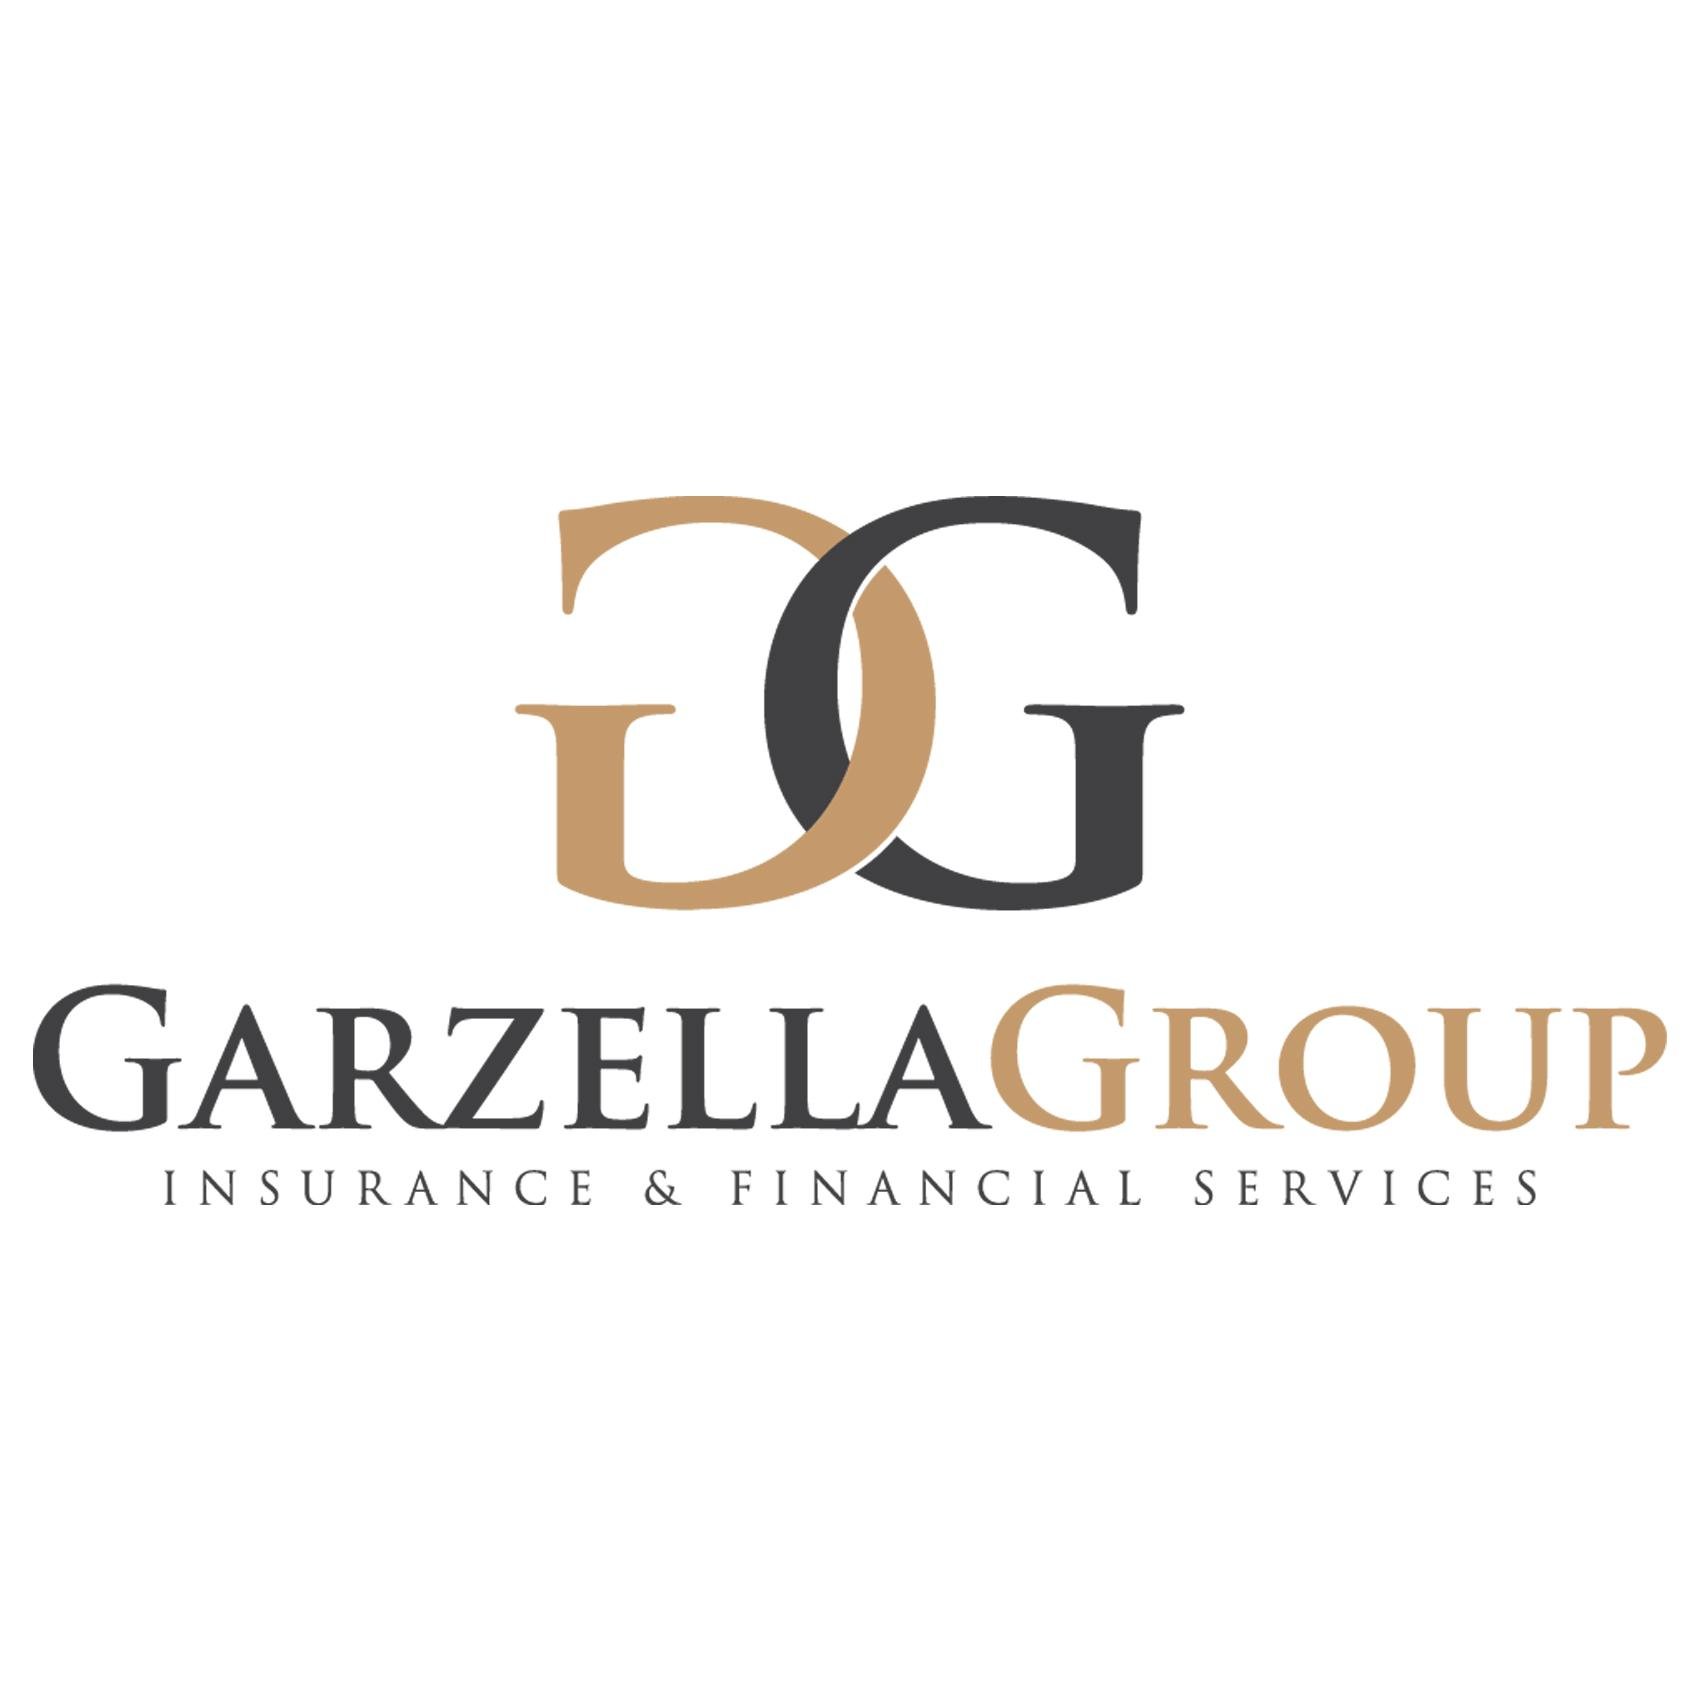 Garzella Group is a licensed #finance & #insurance #brokerage with access to many carriers. Check out our careers & internships at https://t.co/DhwpcqyFQI